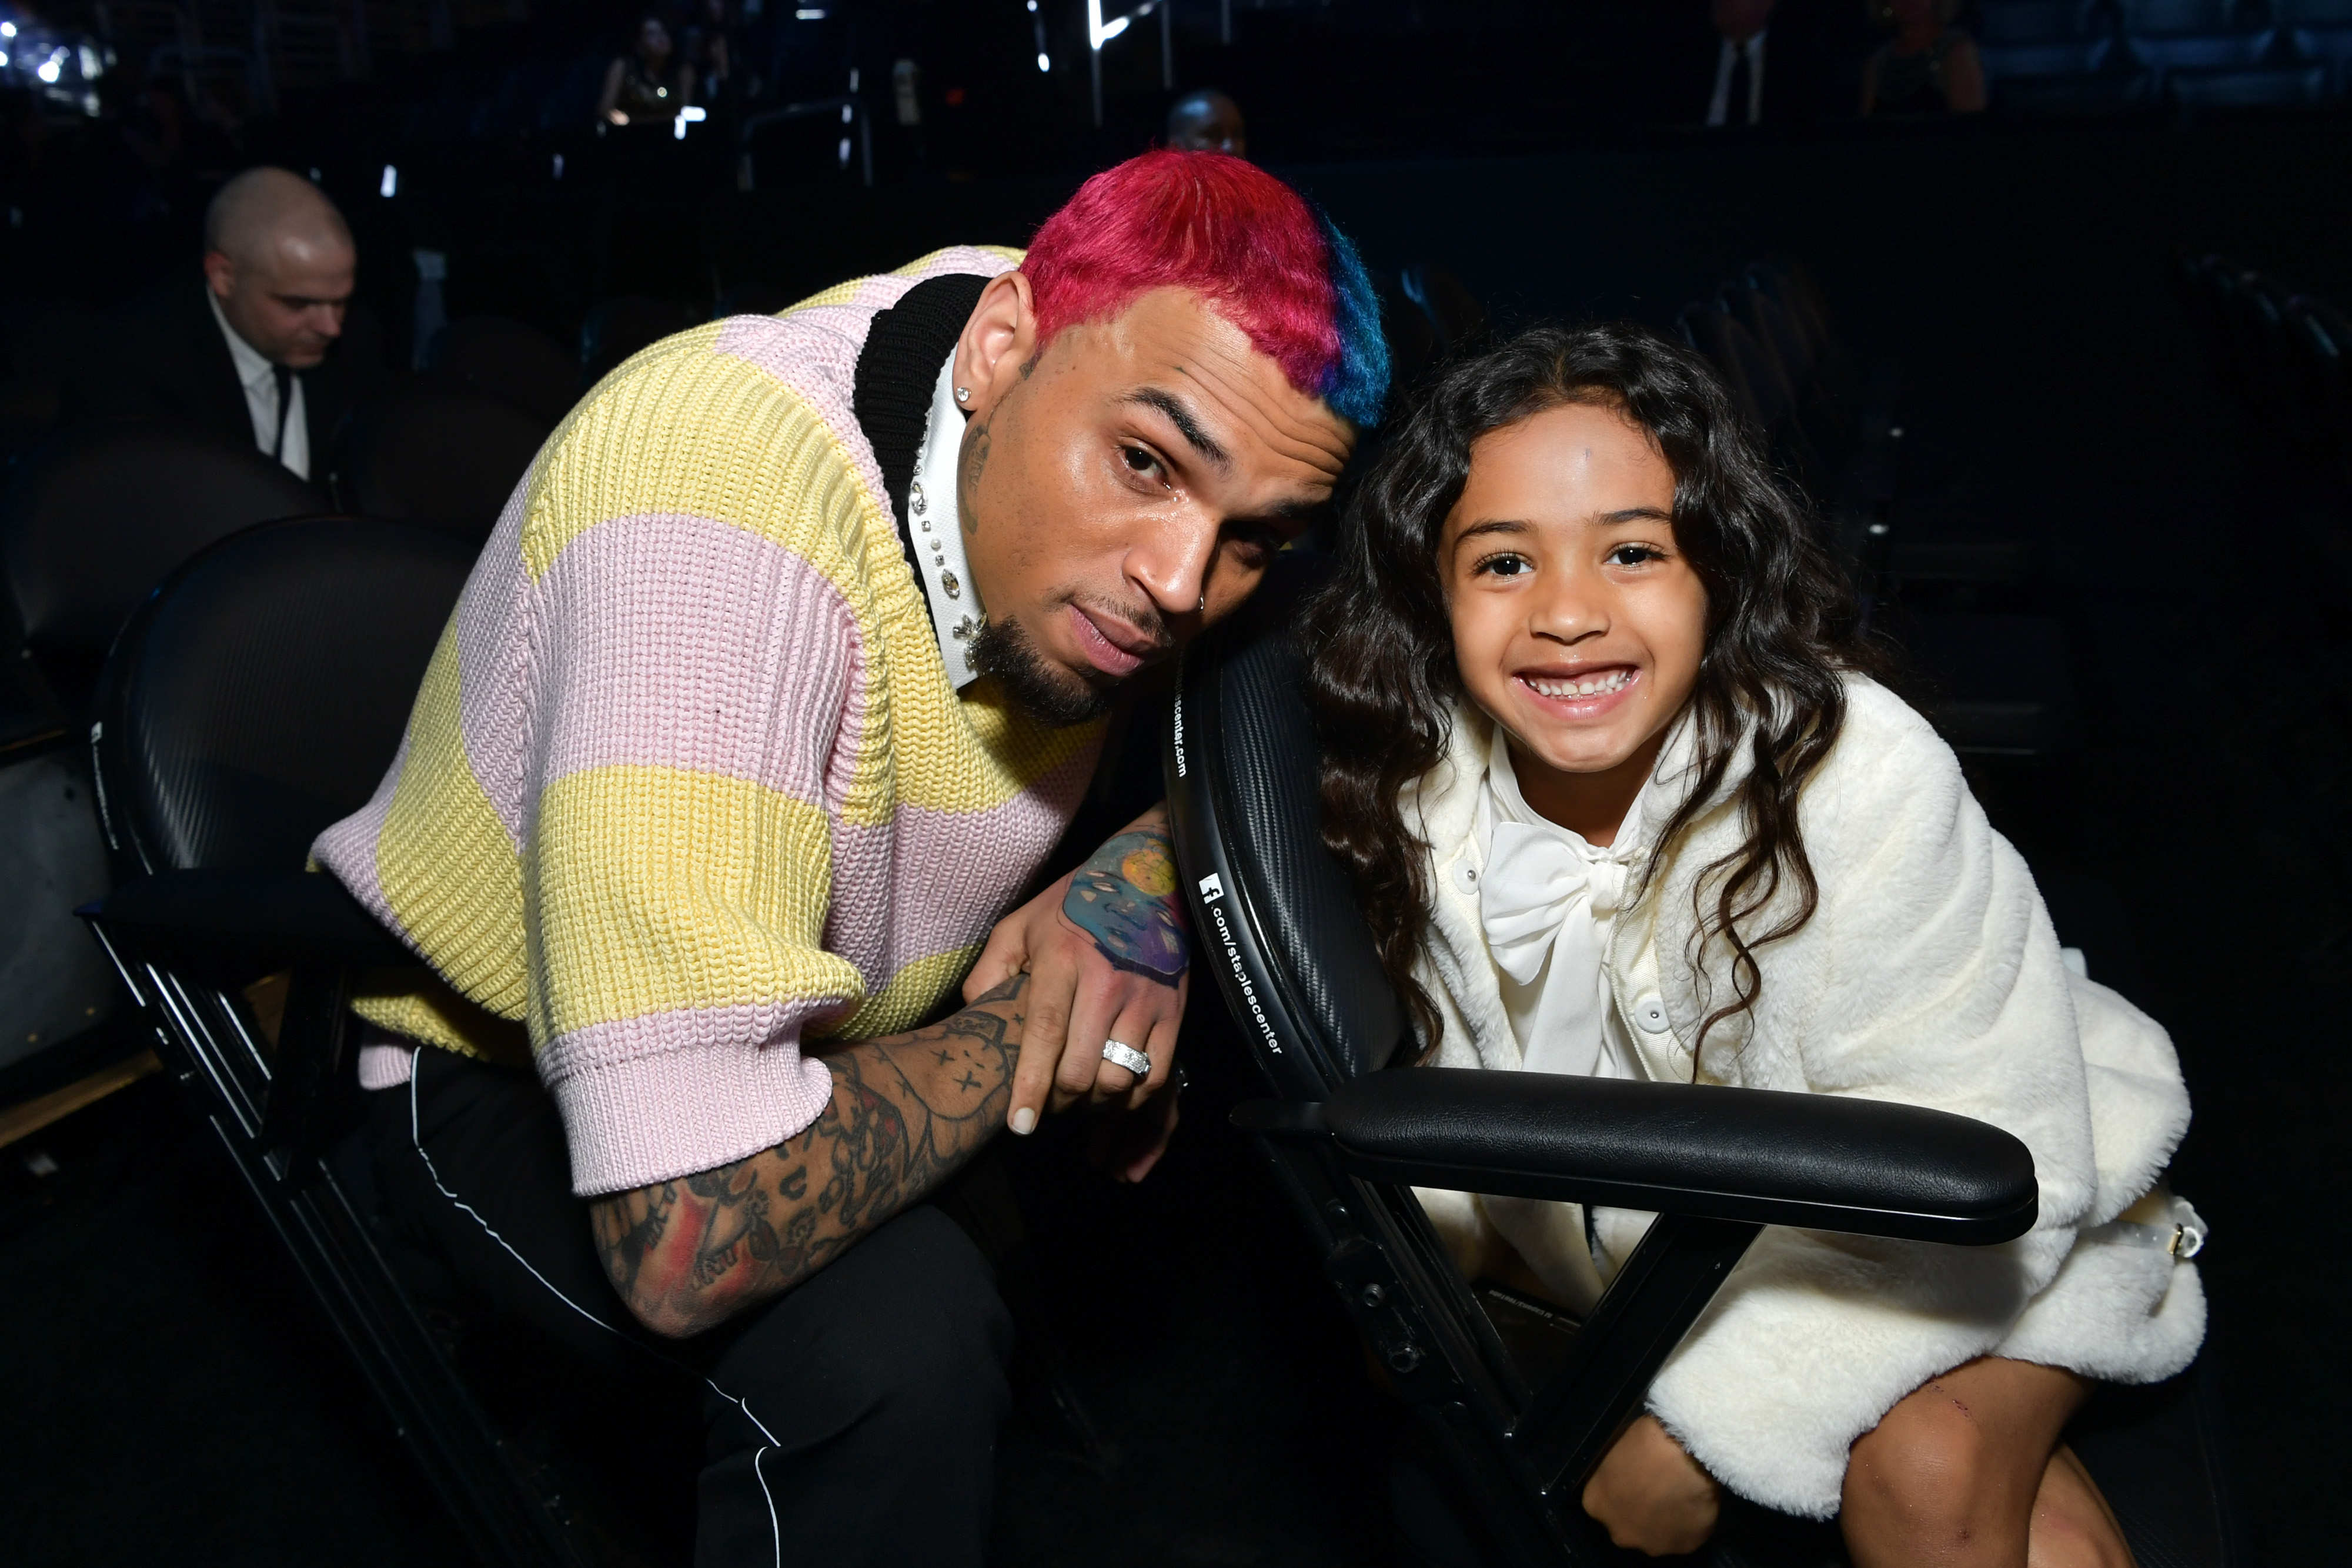 Chris Browns Daughter Royalty Shows Dance Moves For Gocrazychallenge